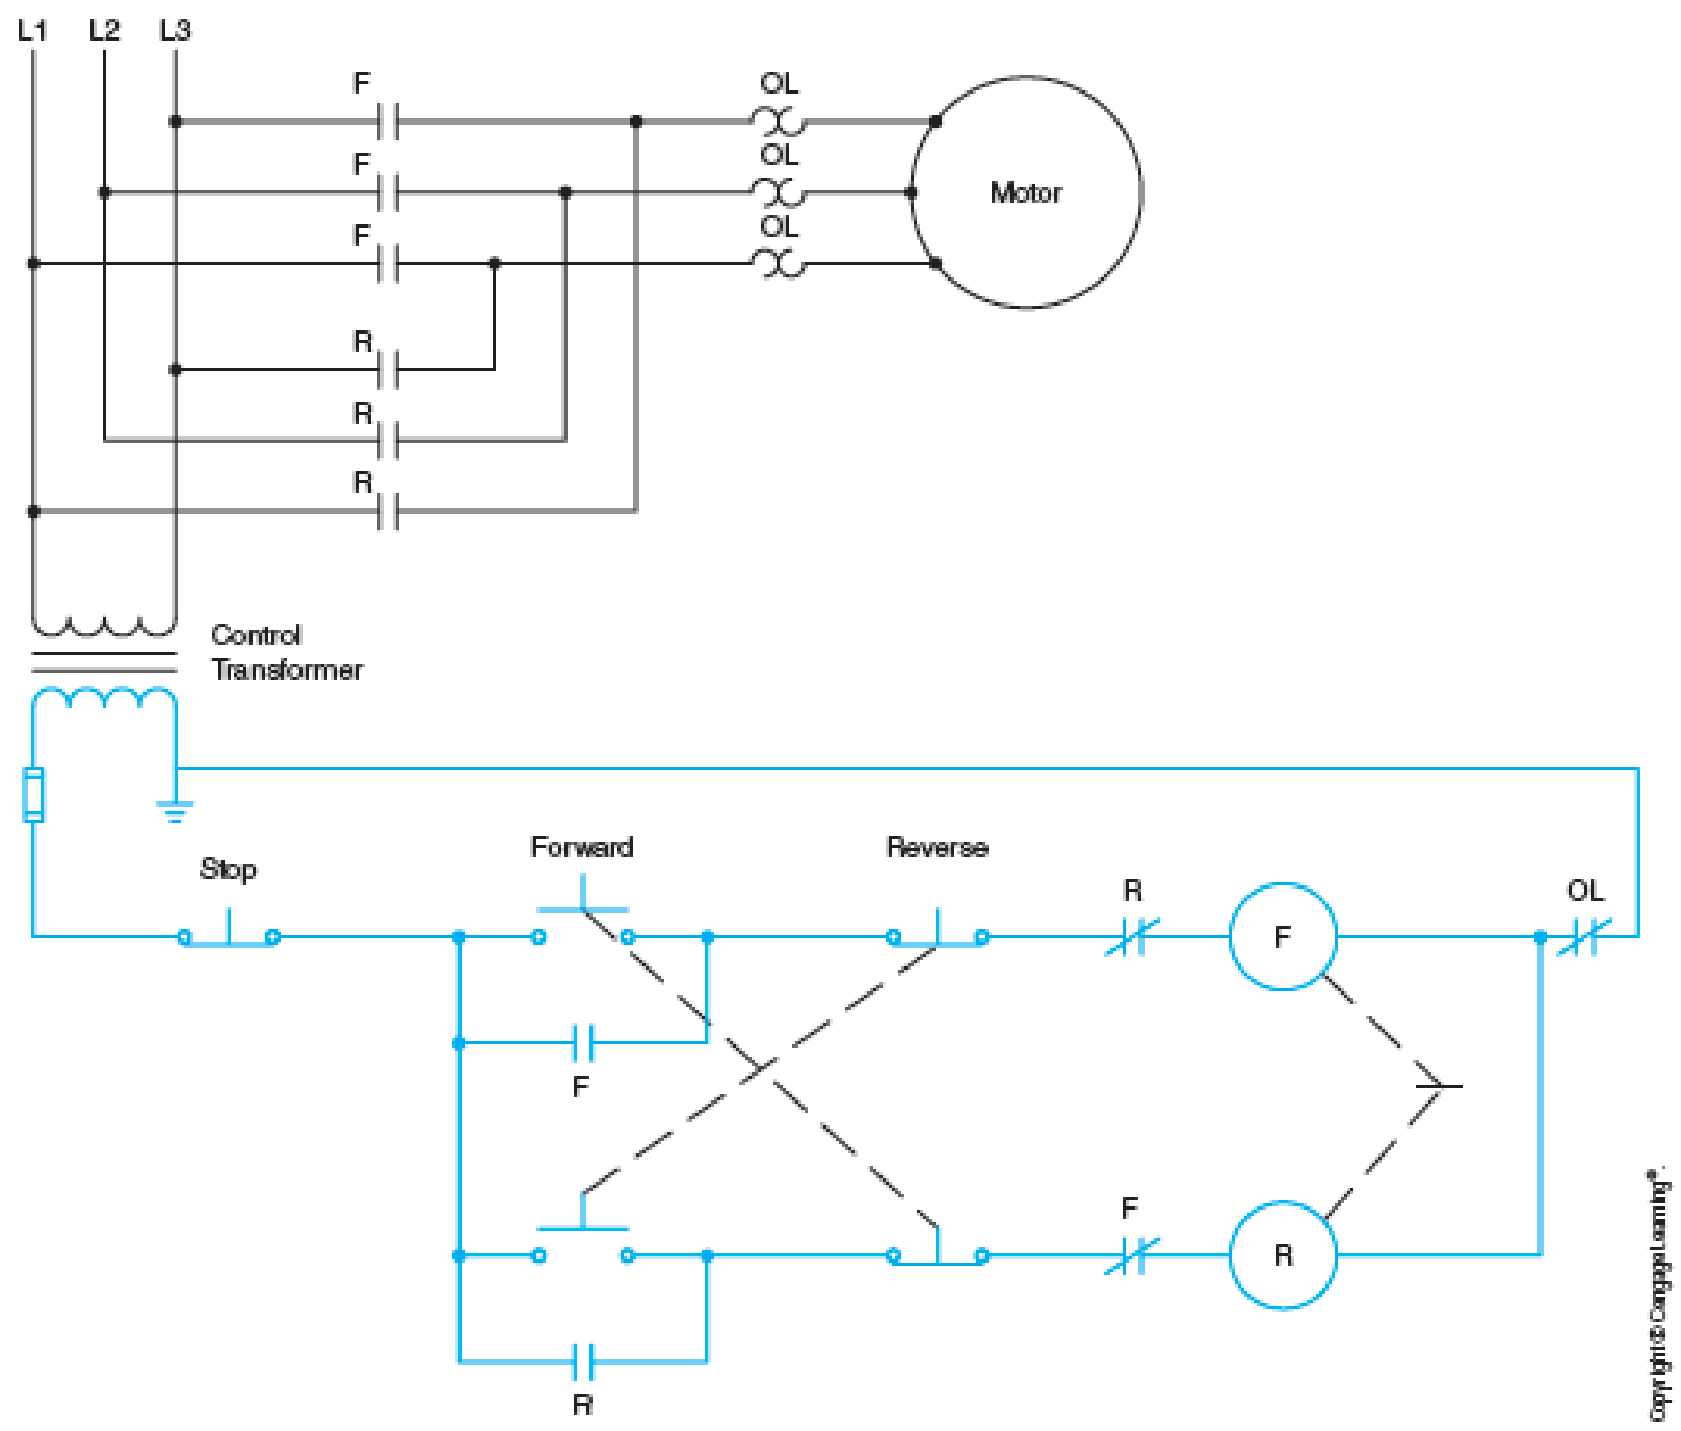 Chapter 21, Problem 8SQ, What is the sequence of the operations if the limit switches, shown in Figure 216, are used. (Limit 